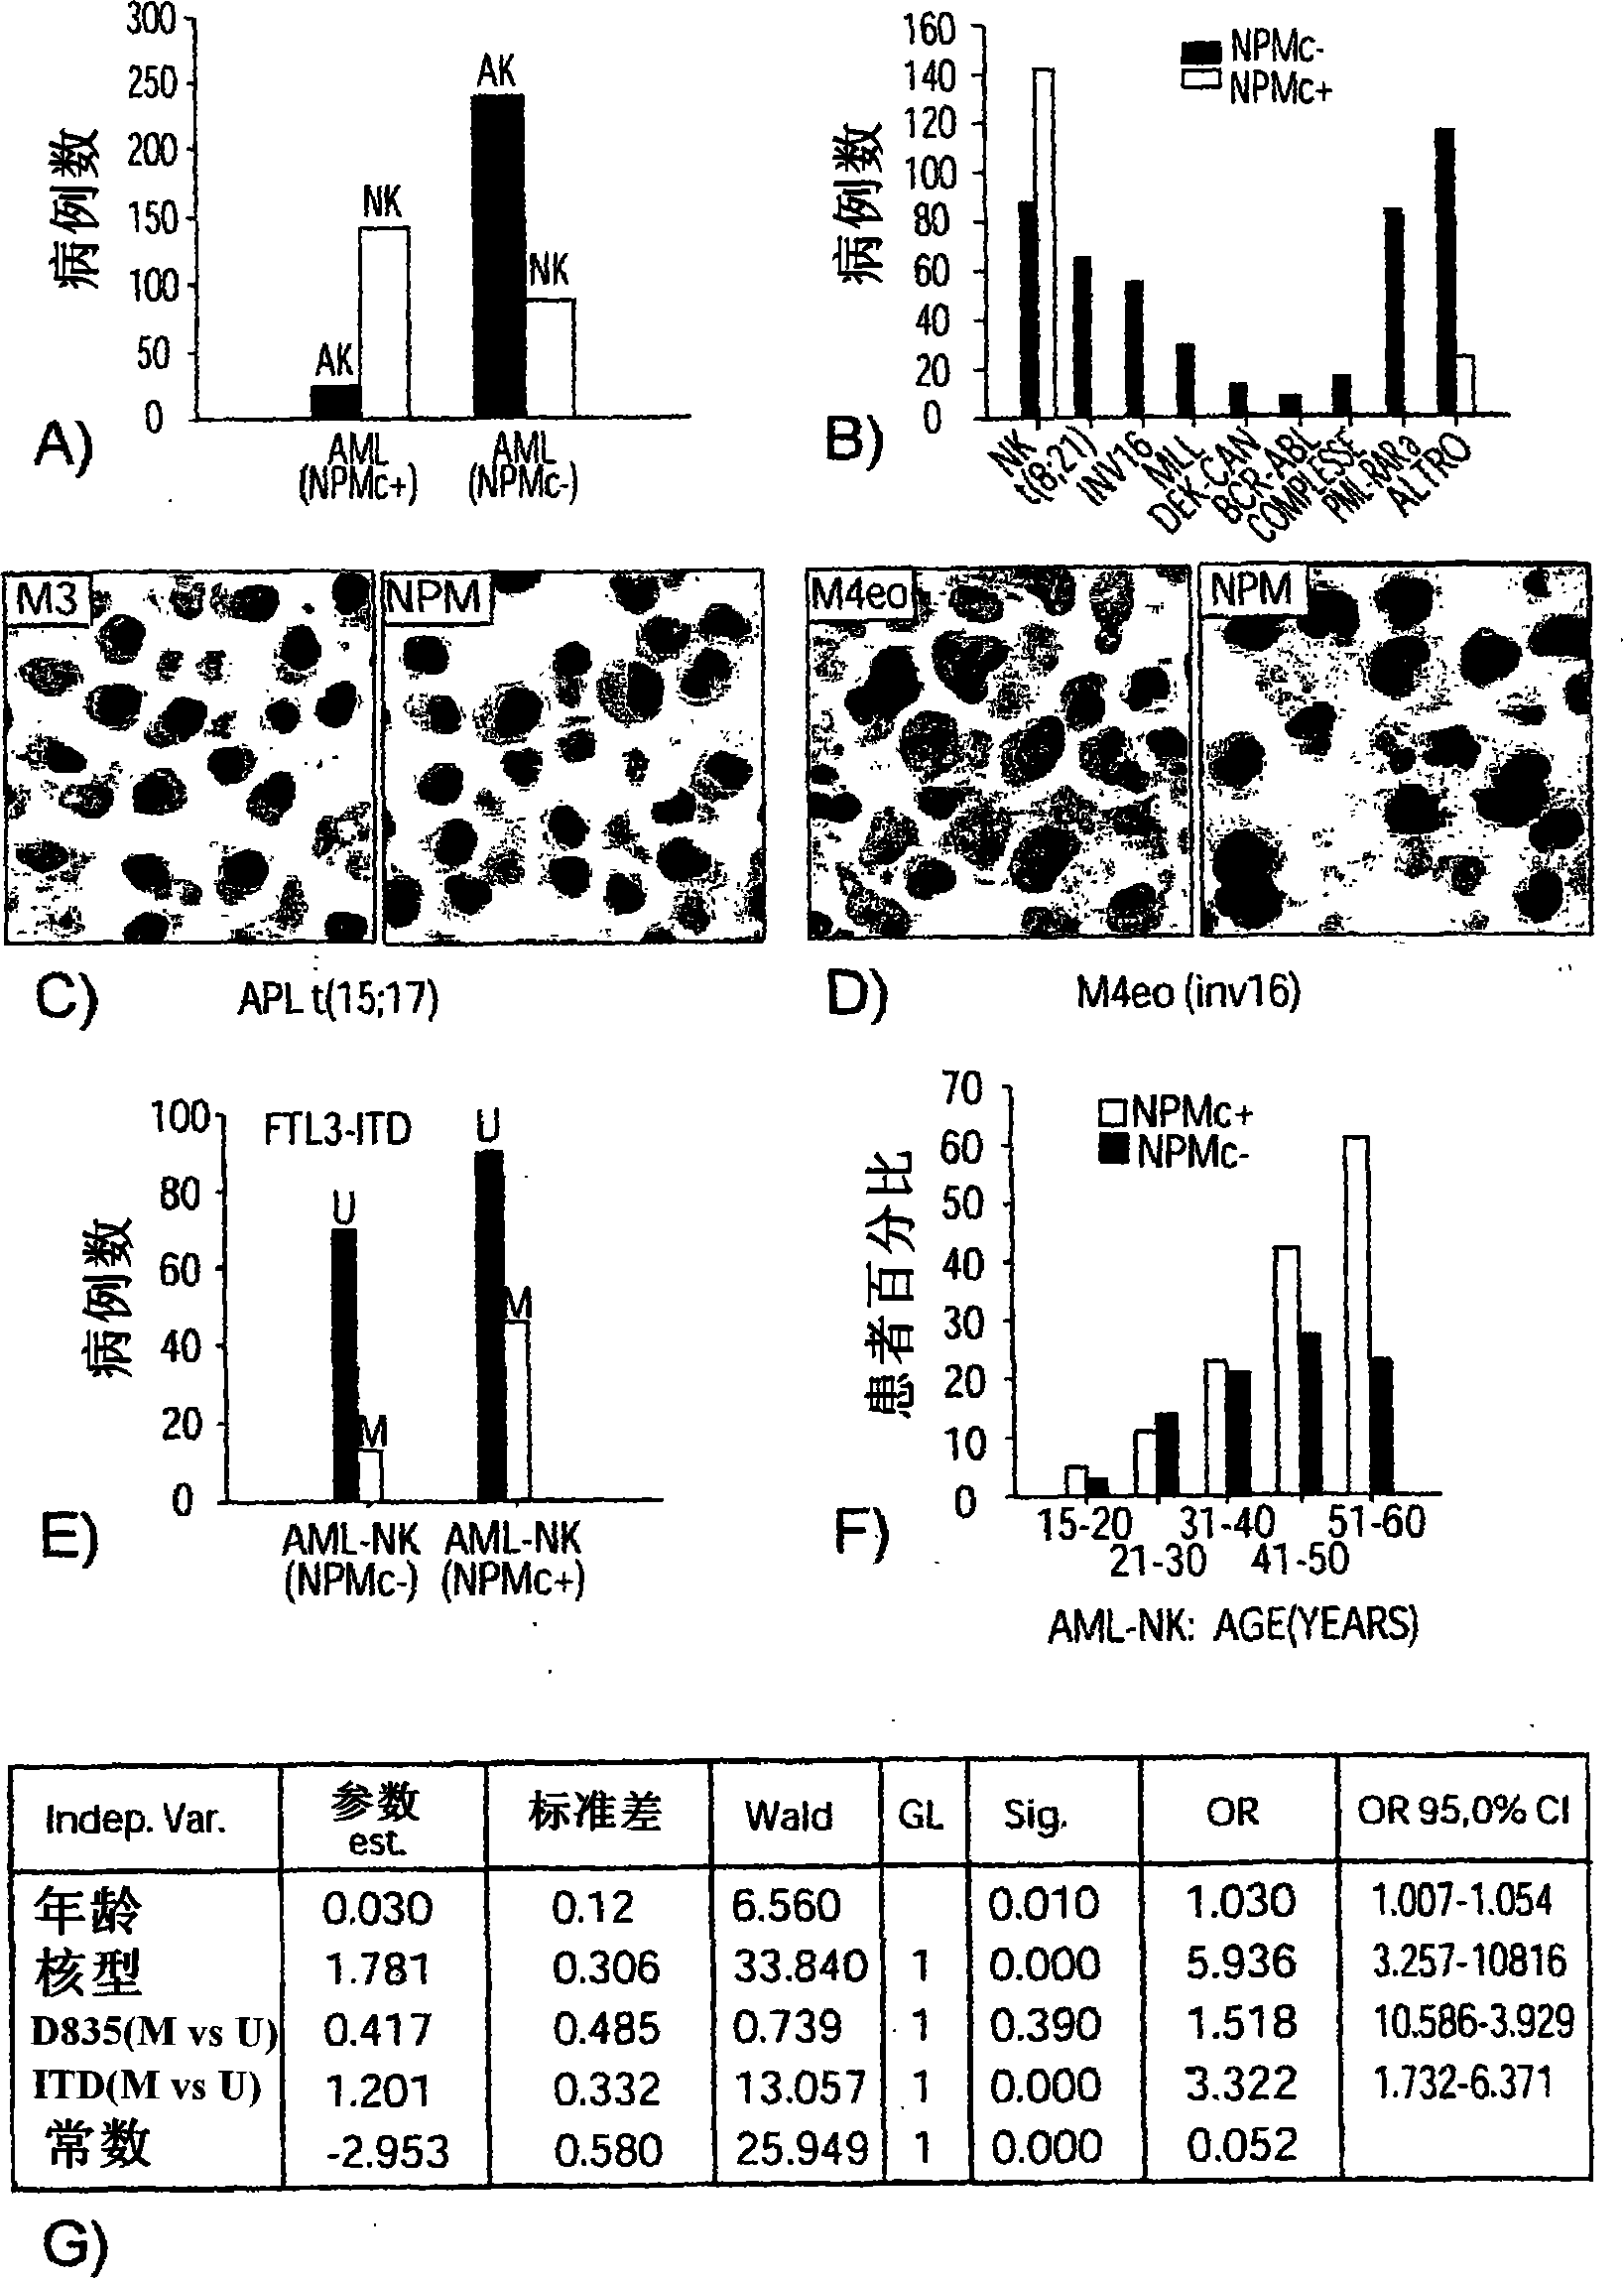 Nucleophosmin protein (npm) mutants, corresponding gene sequences and uses thereof